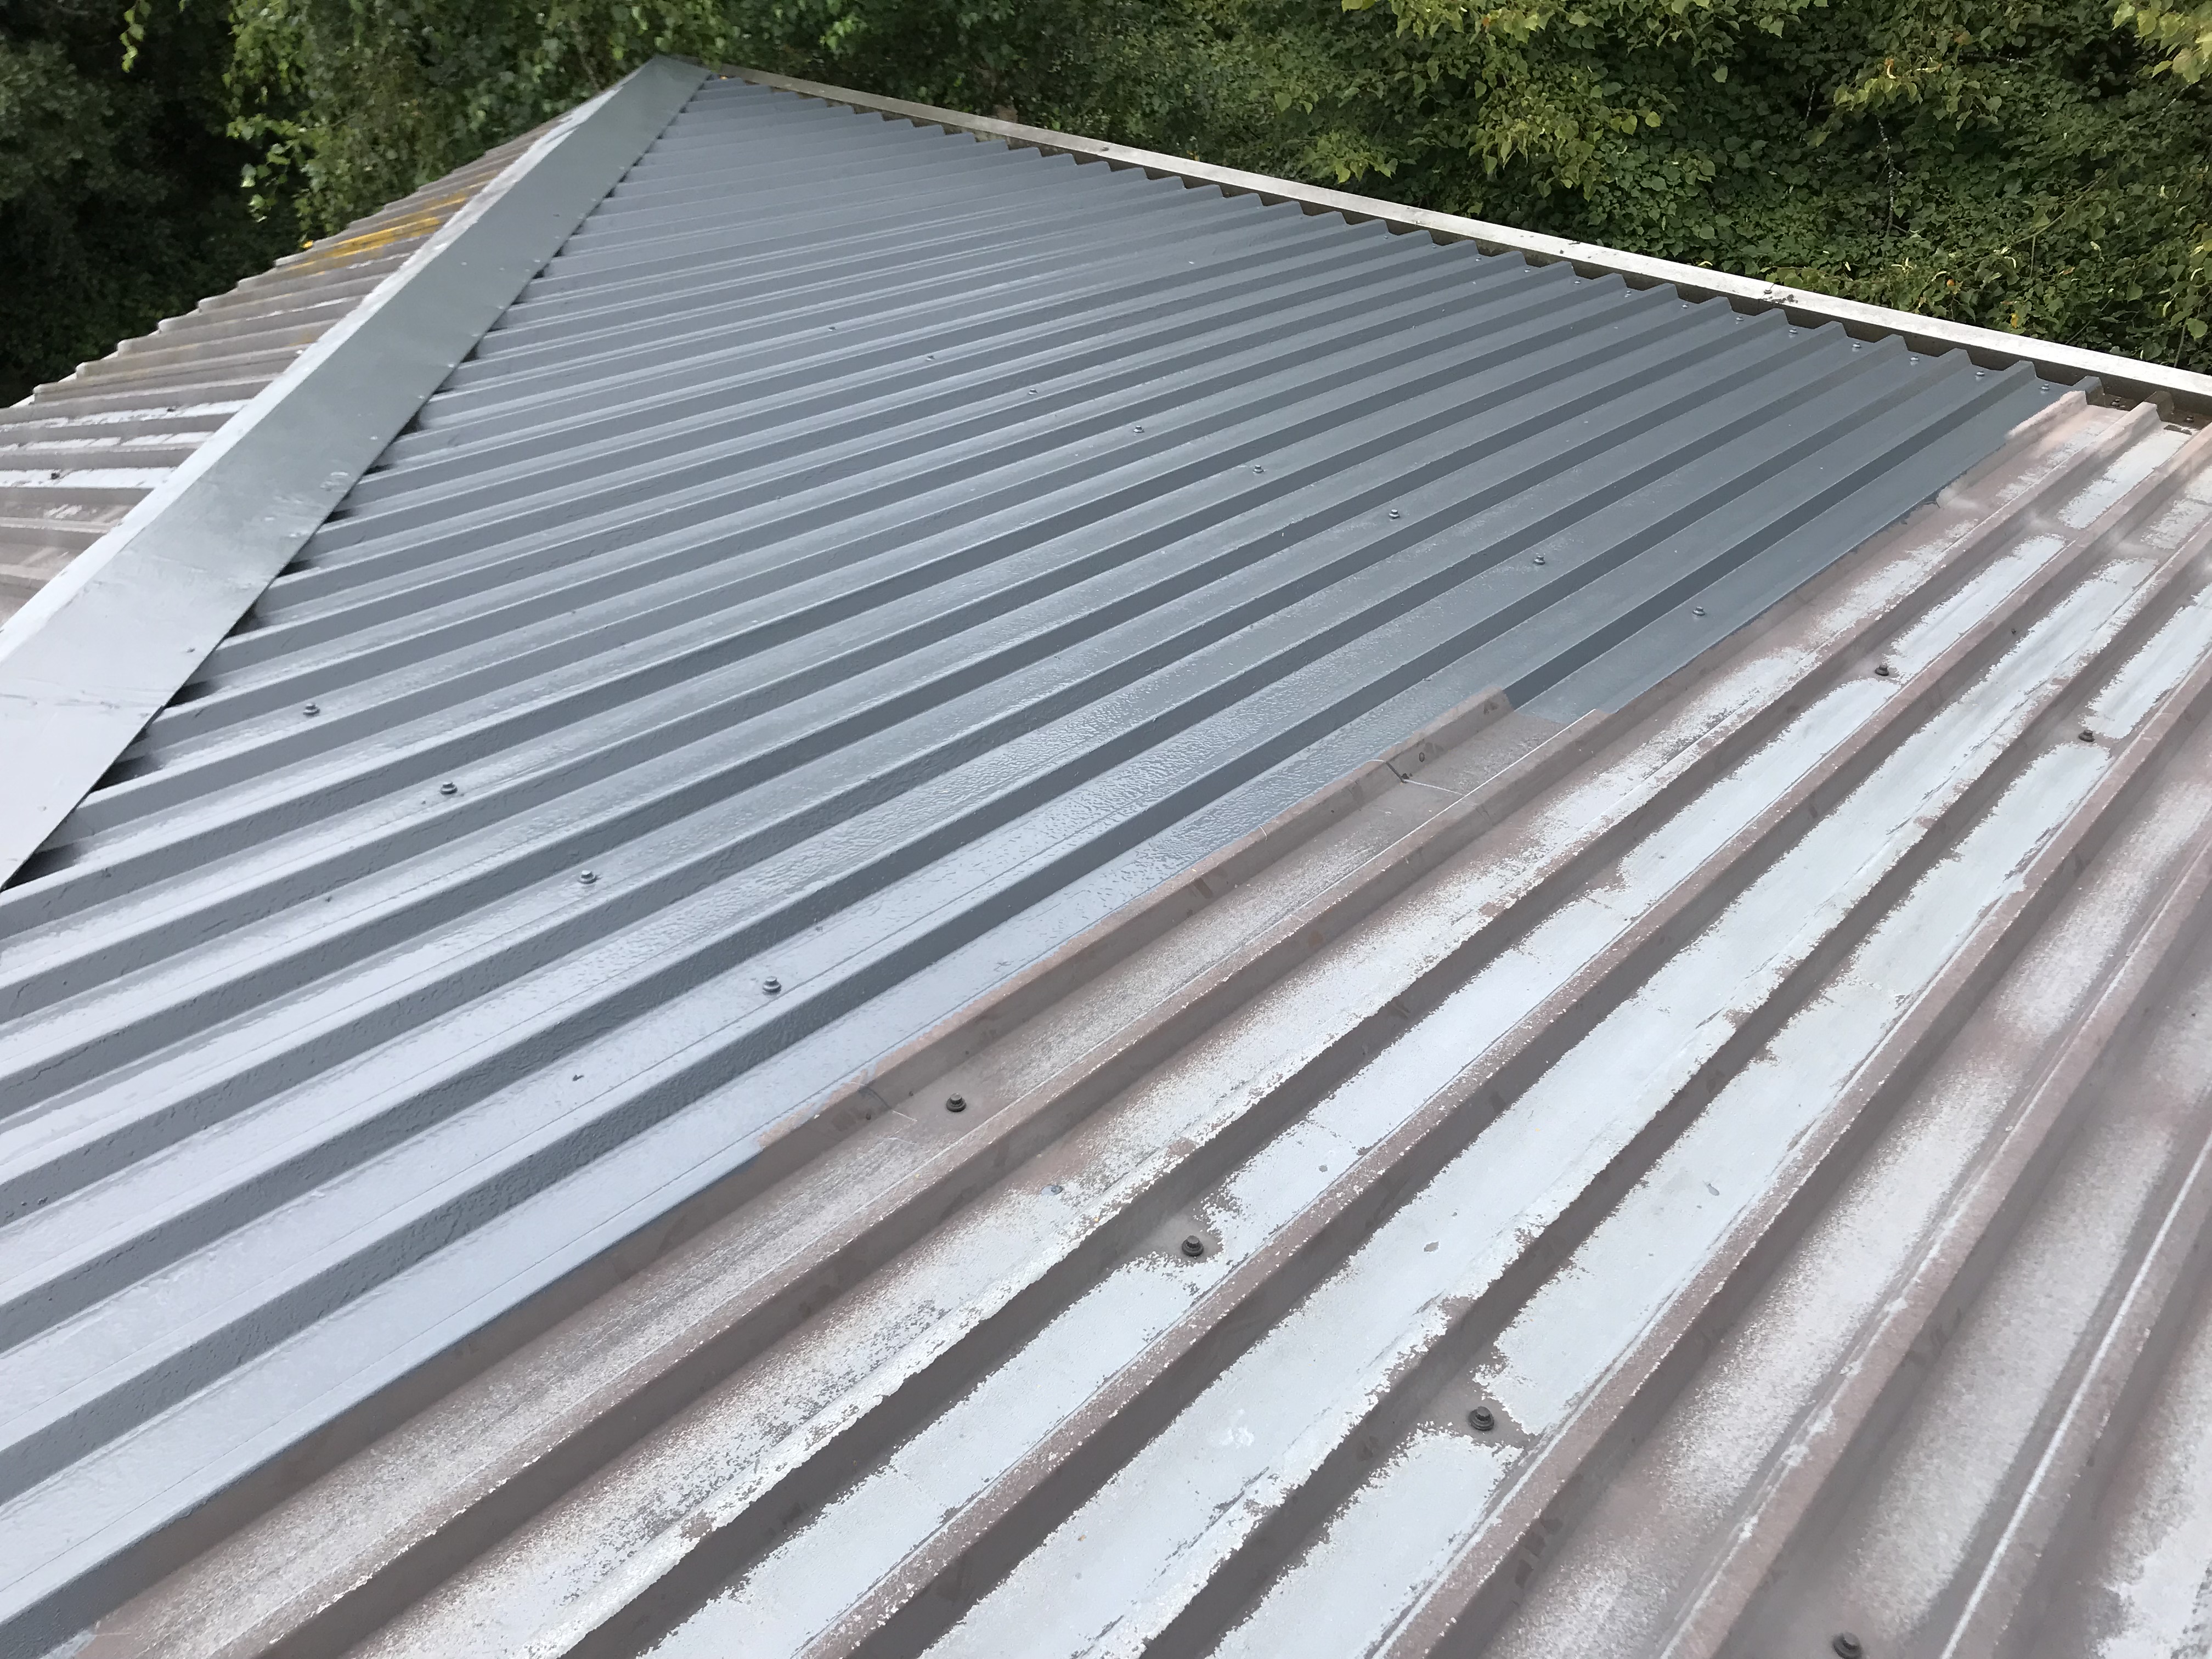 A metal Roof